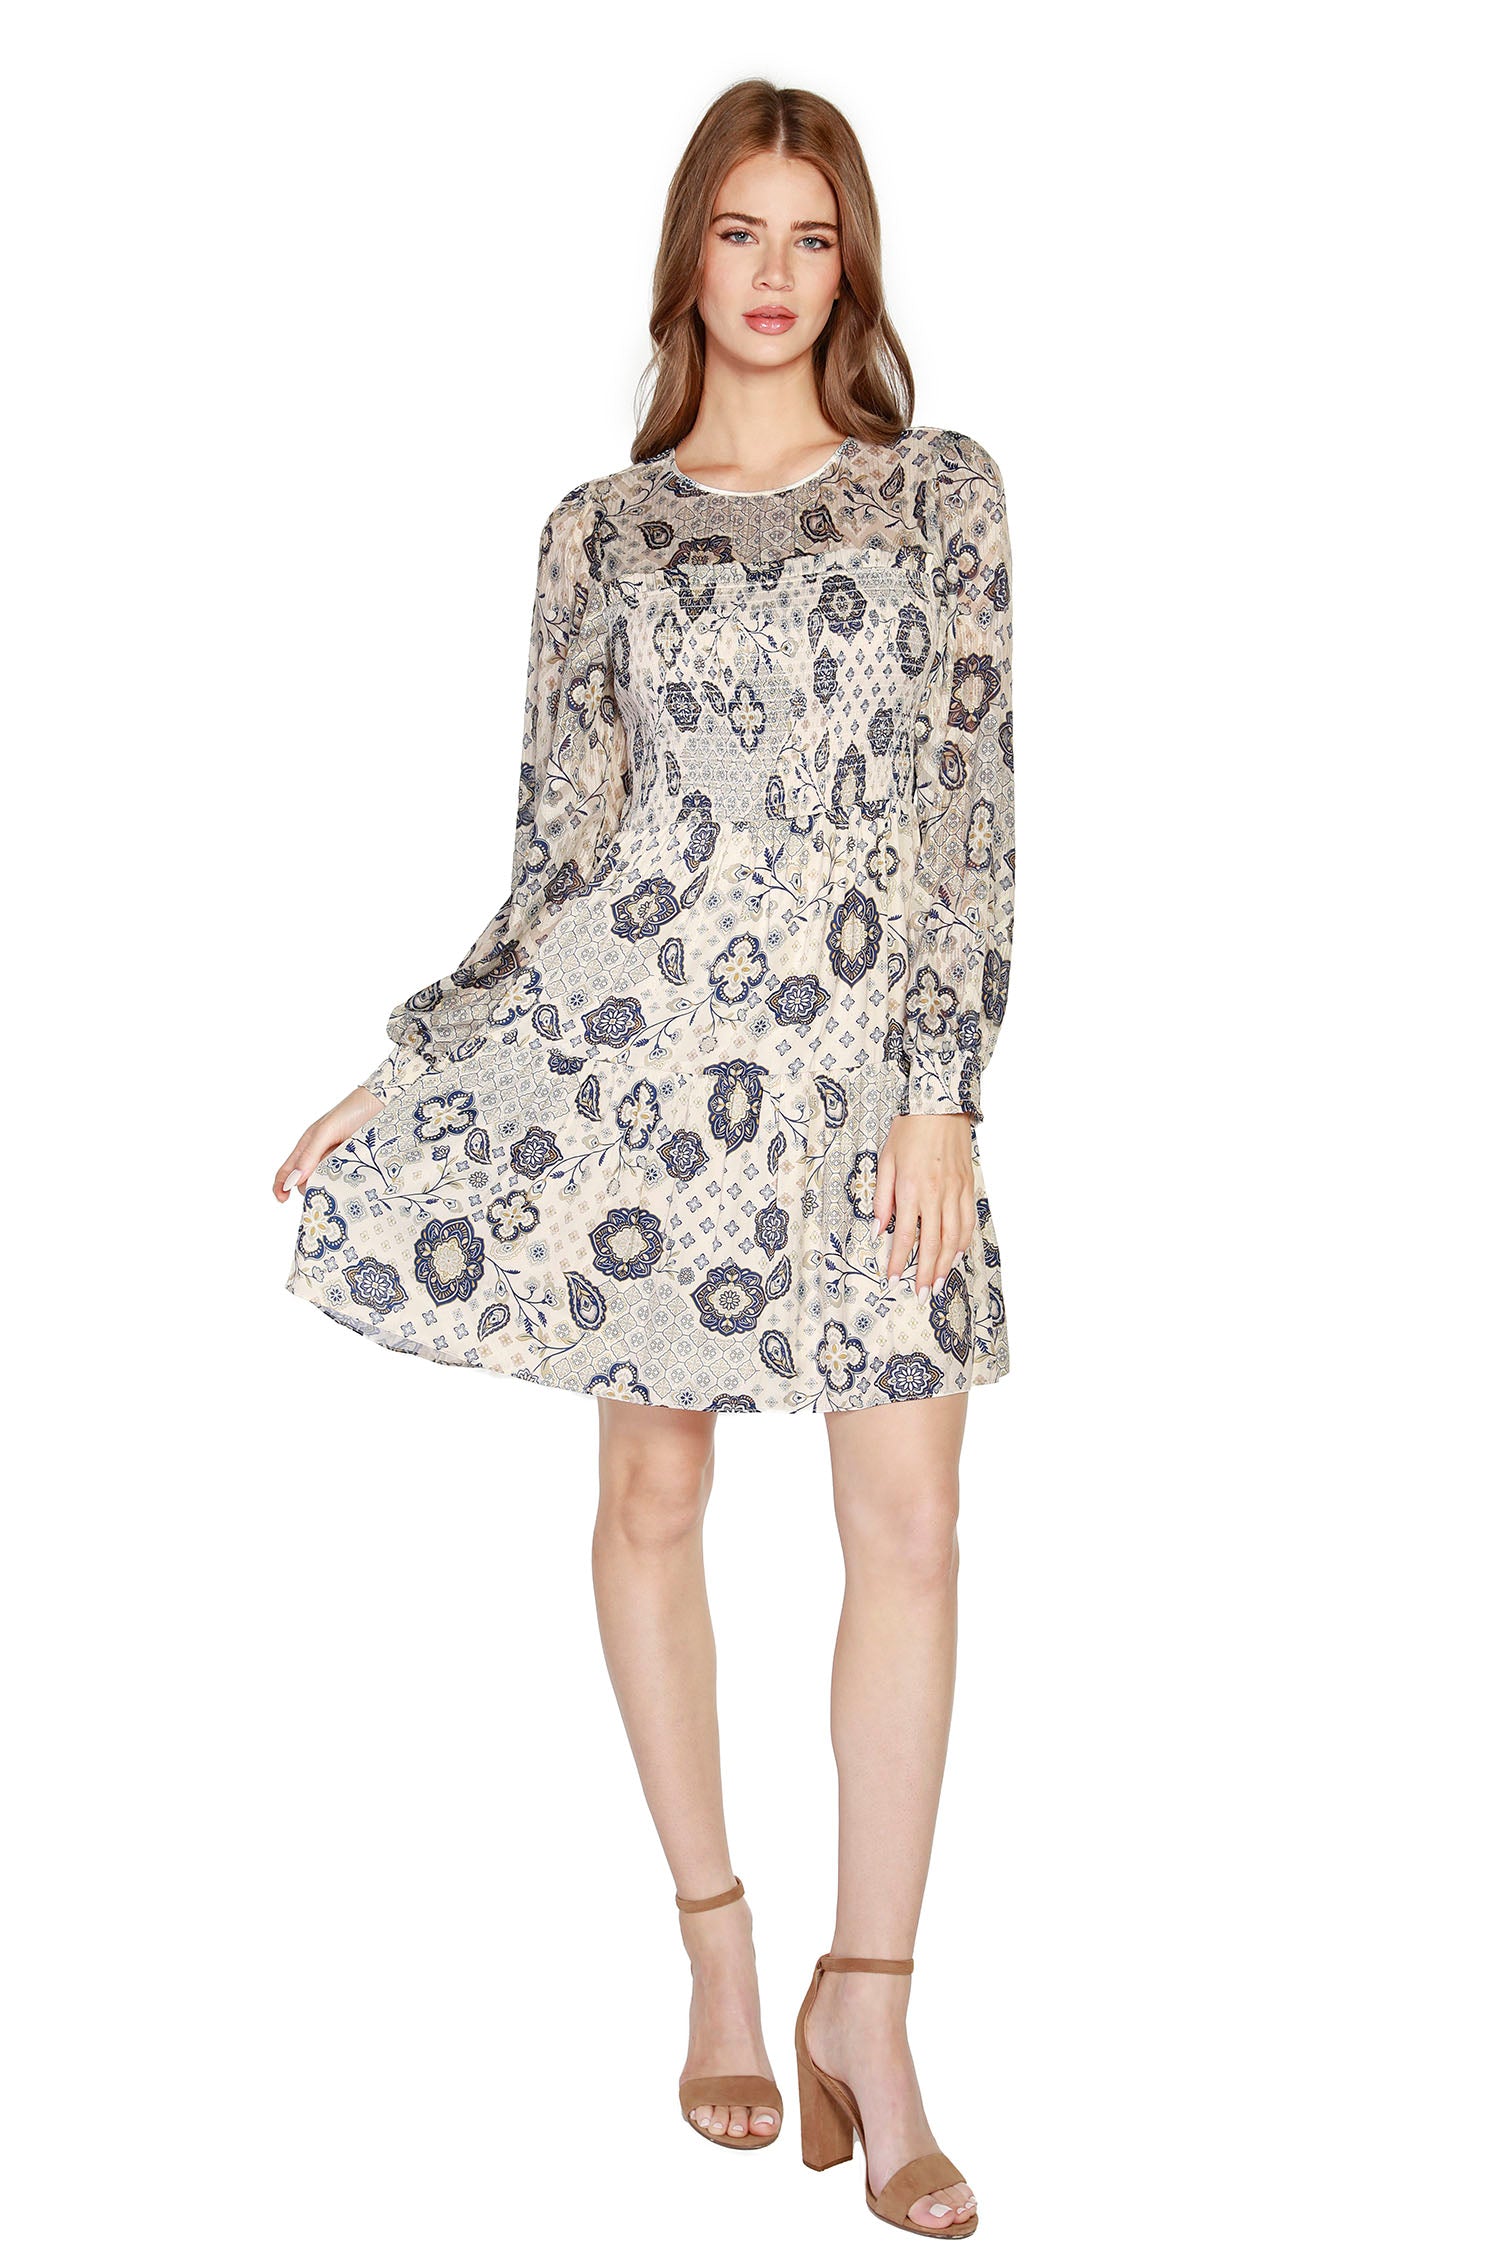 Women's Floral Paisley Dress with Chiffon and a Touch of Shimmer | LAST CALL